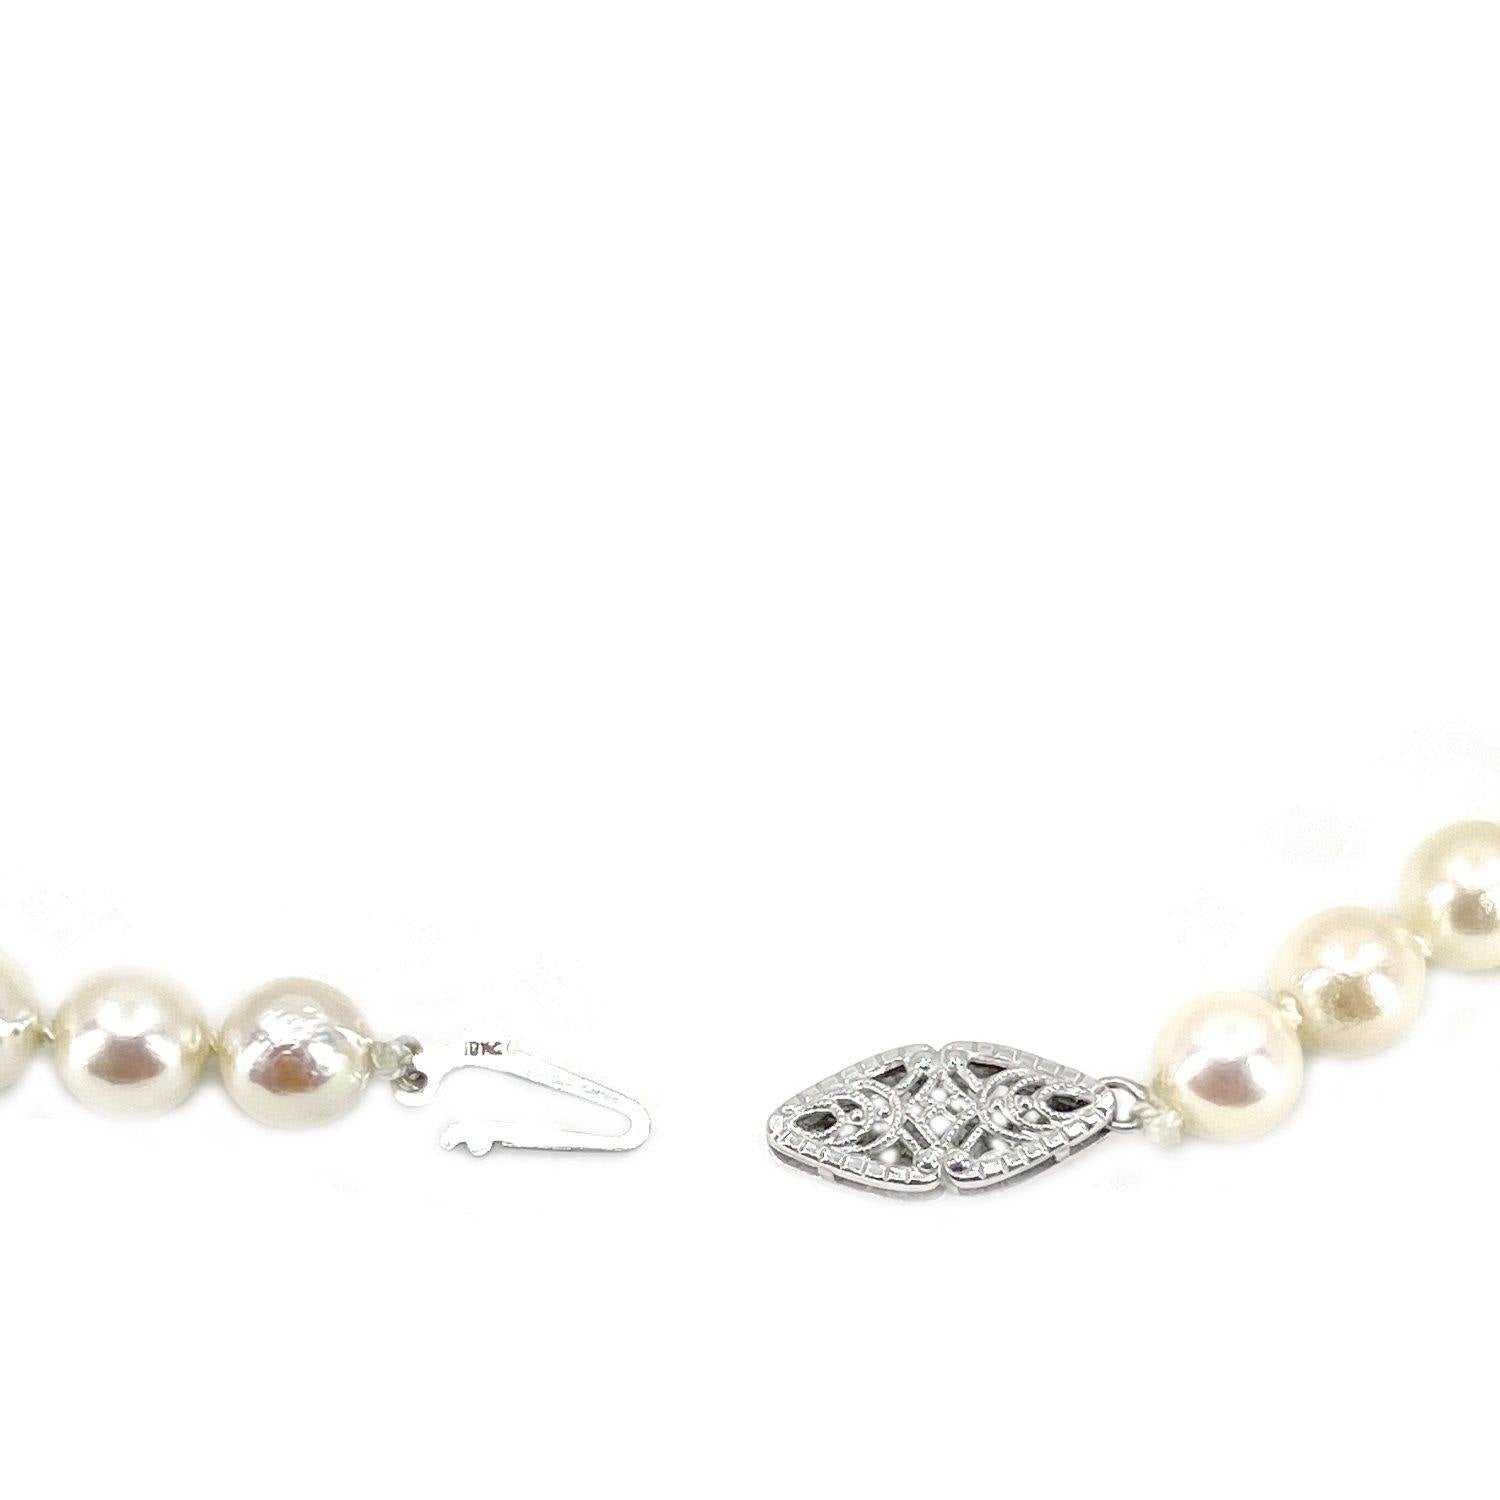 Sweetheart Lace Filigree Japanese Cultured Akoya Pearl Necklace - 10K White Gold 17.50 Inch